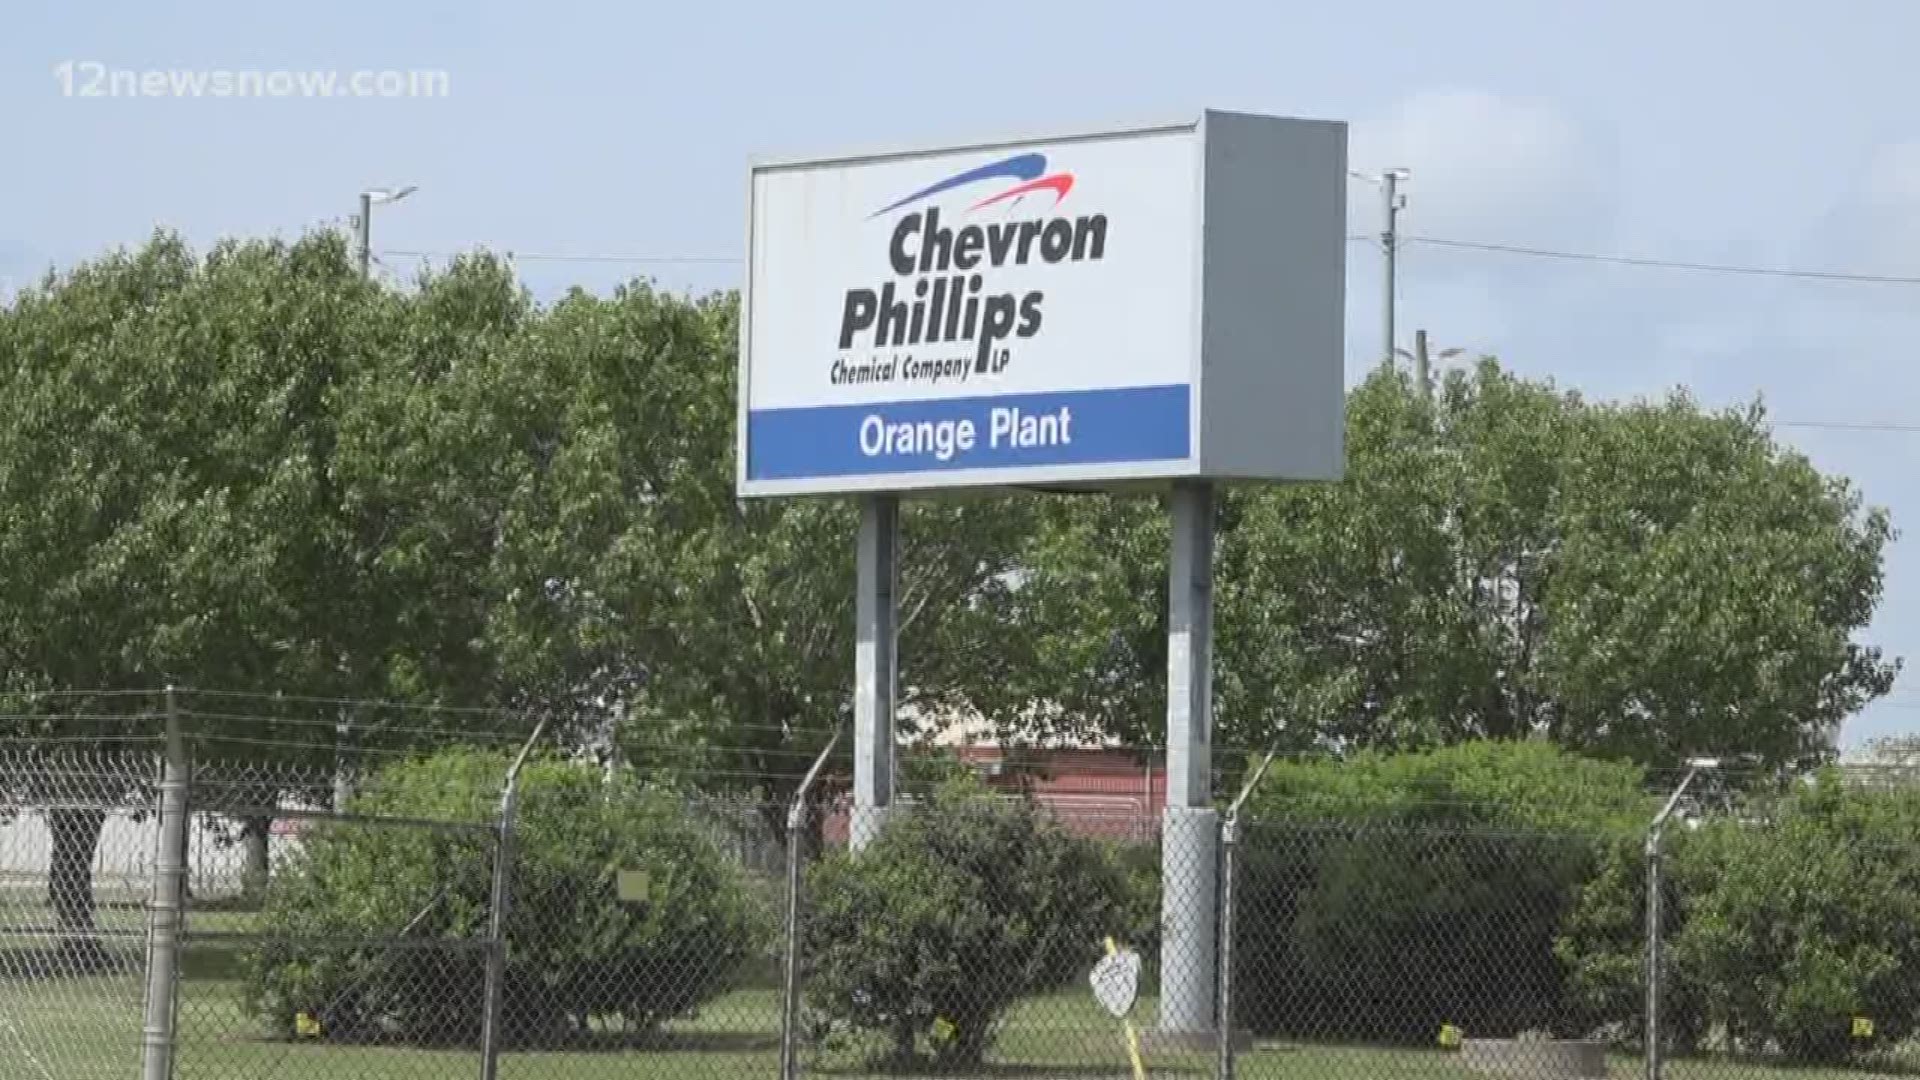 Today the council voted to 'deannex' property along chemical row at the request of Chevron Phillips.